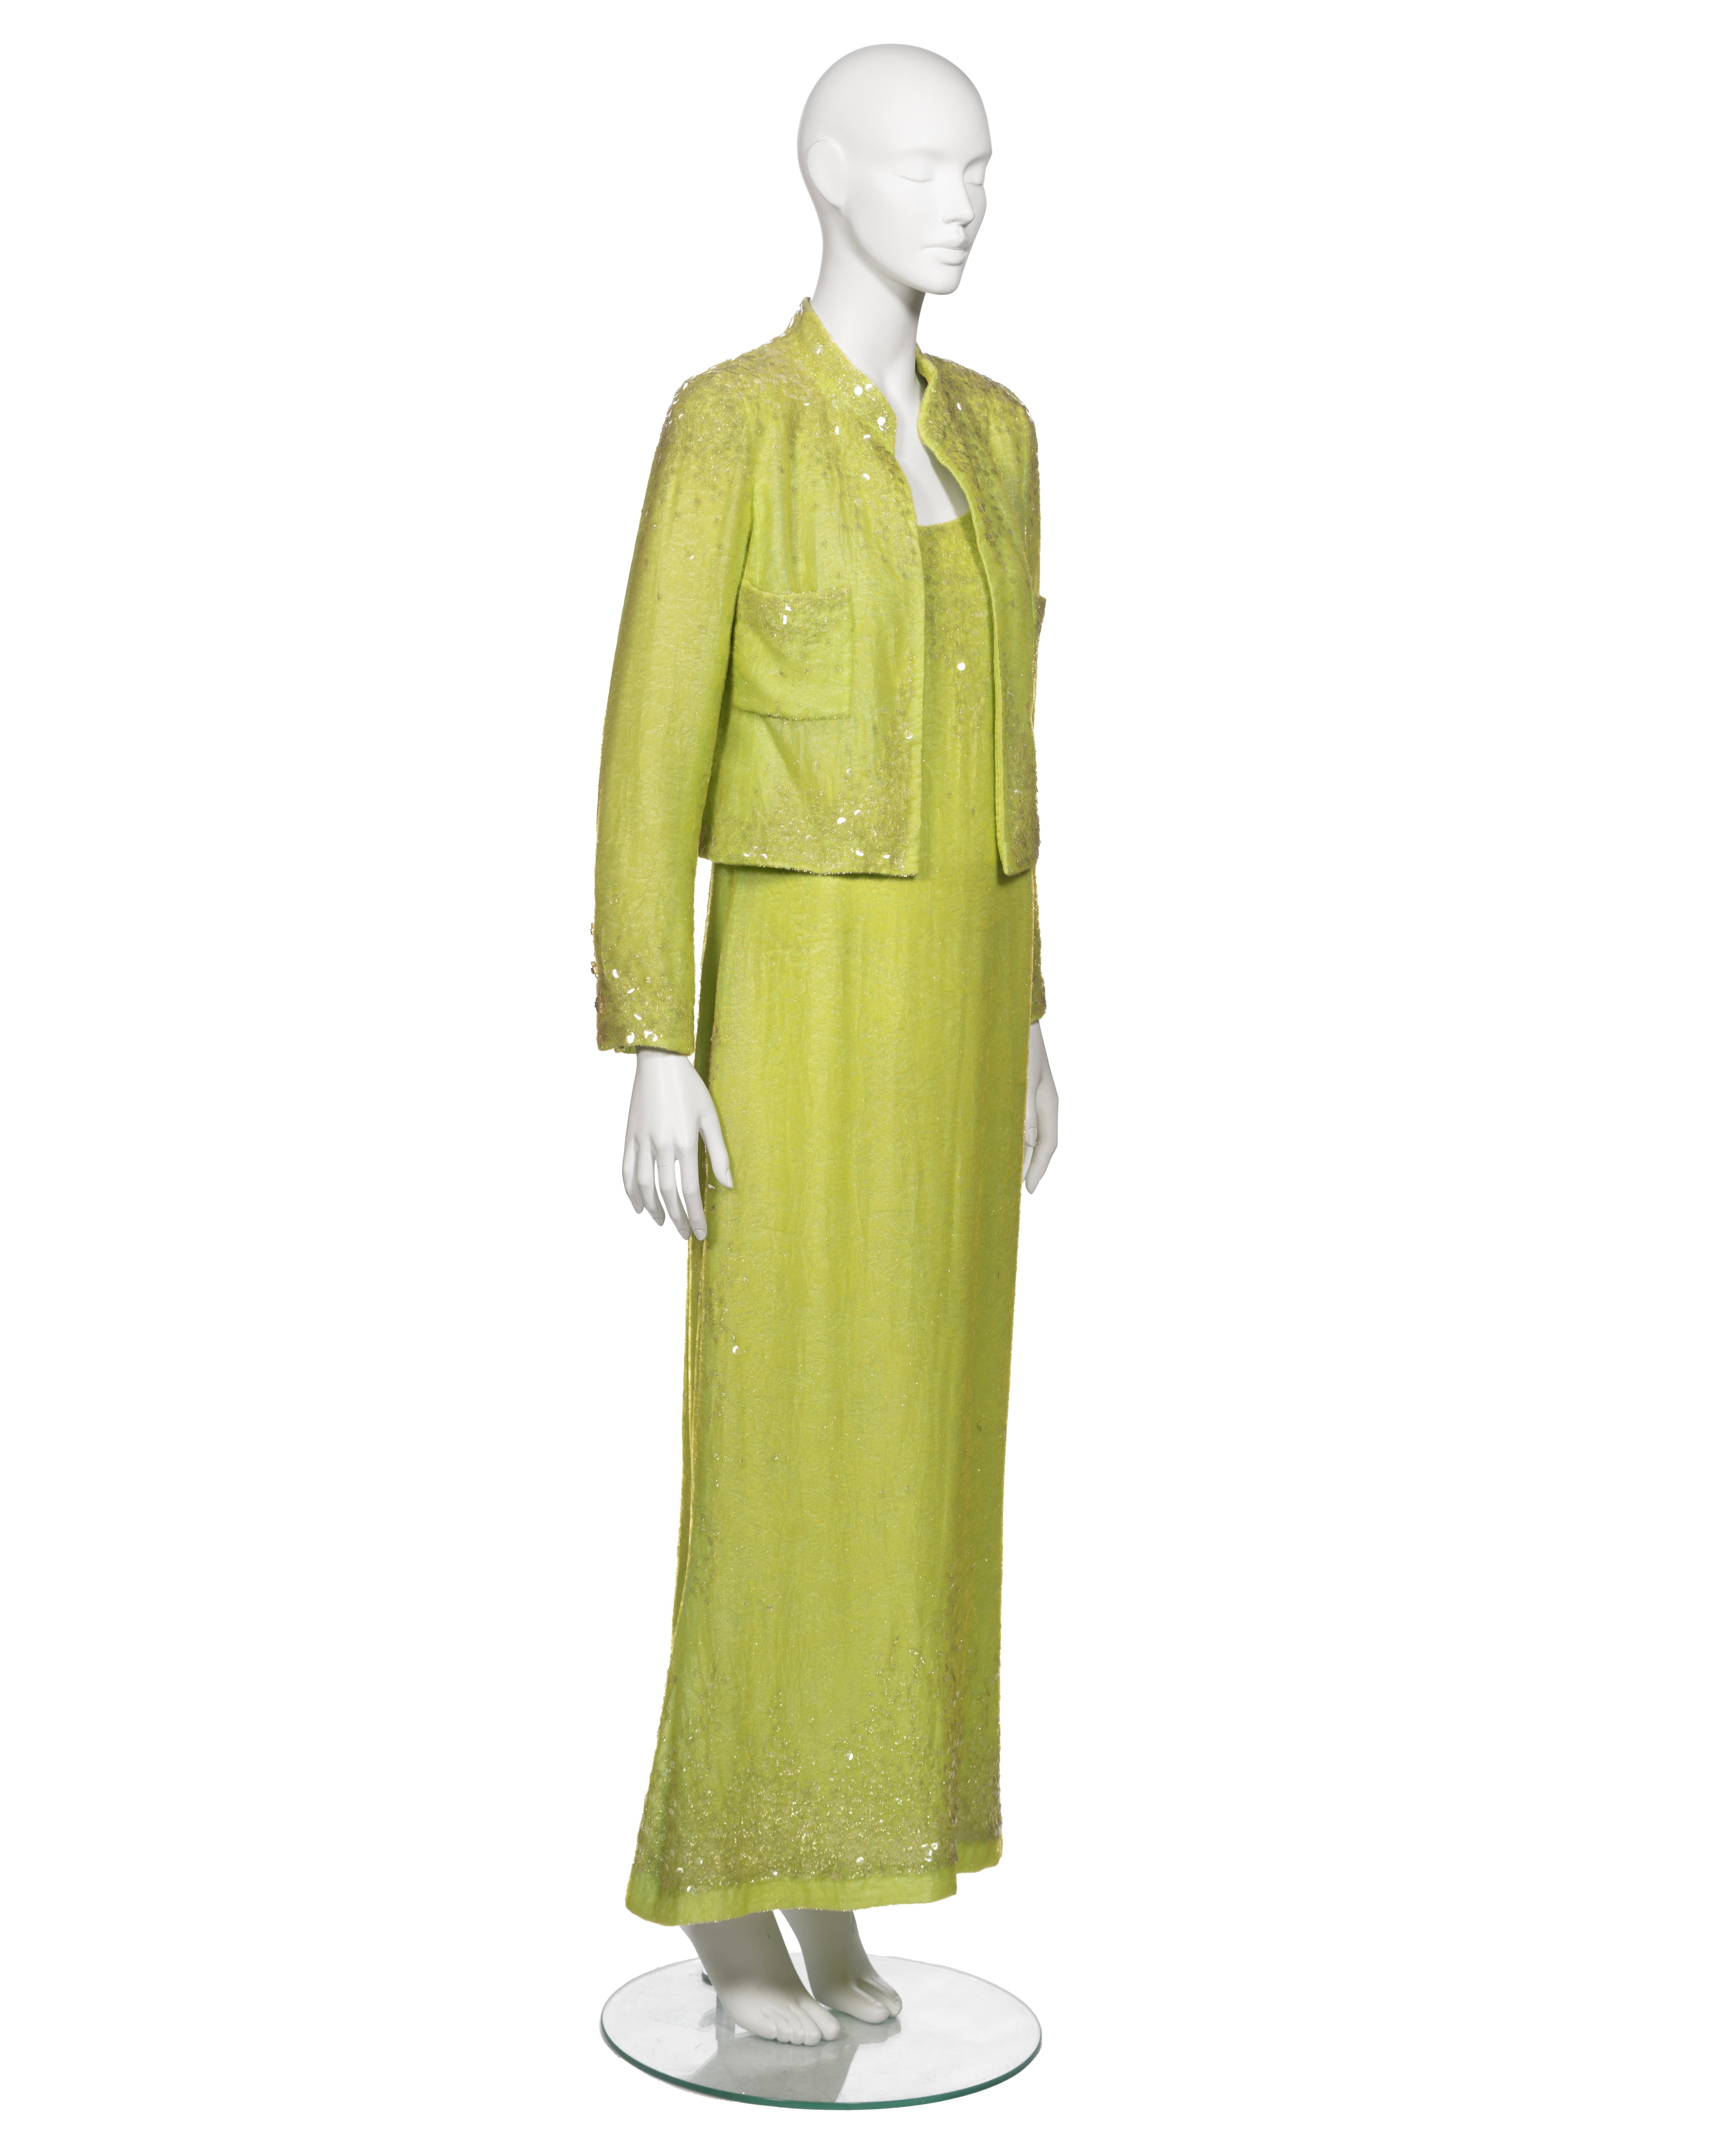 Chanel by Karl Lagerfeld Embellished Lime Green Velvet Dress and Jacket, ss 1997 For Sale 5